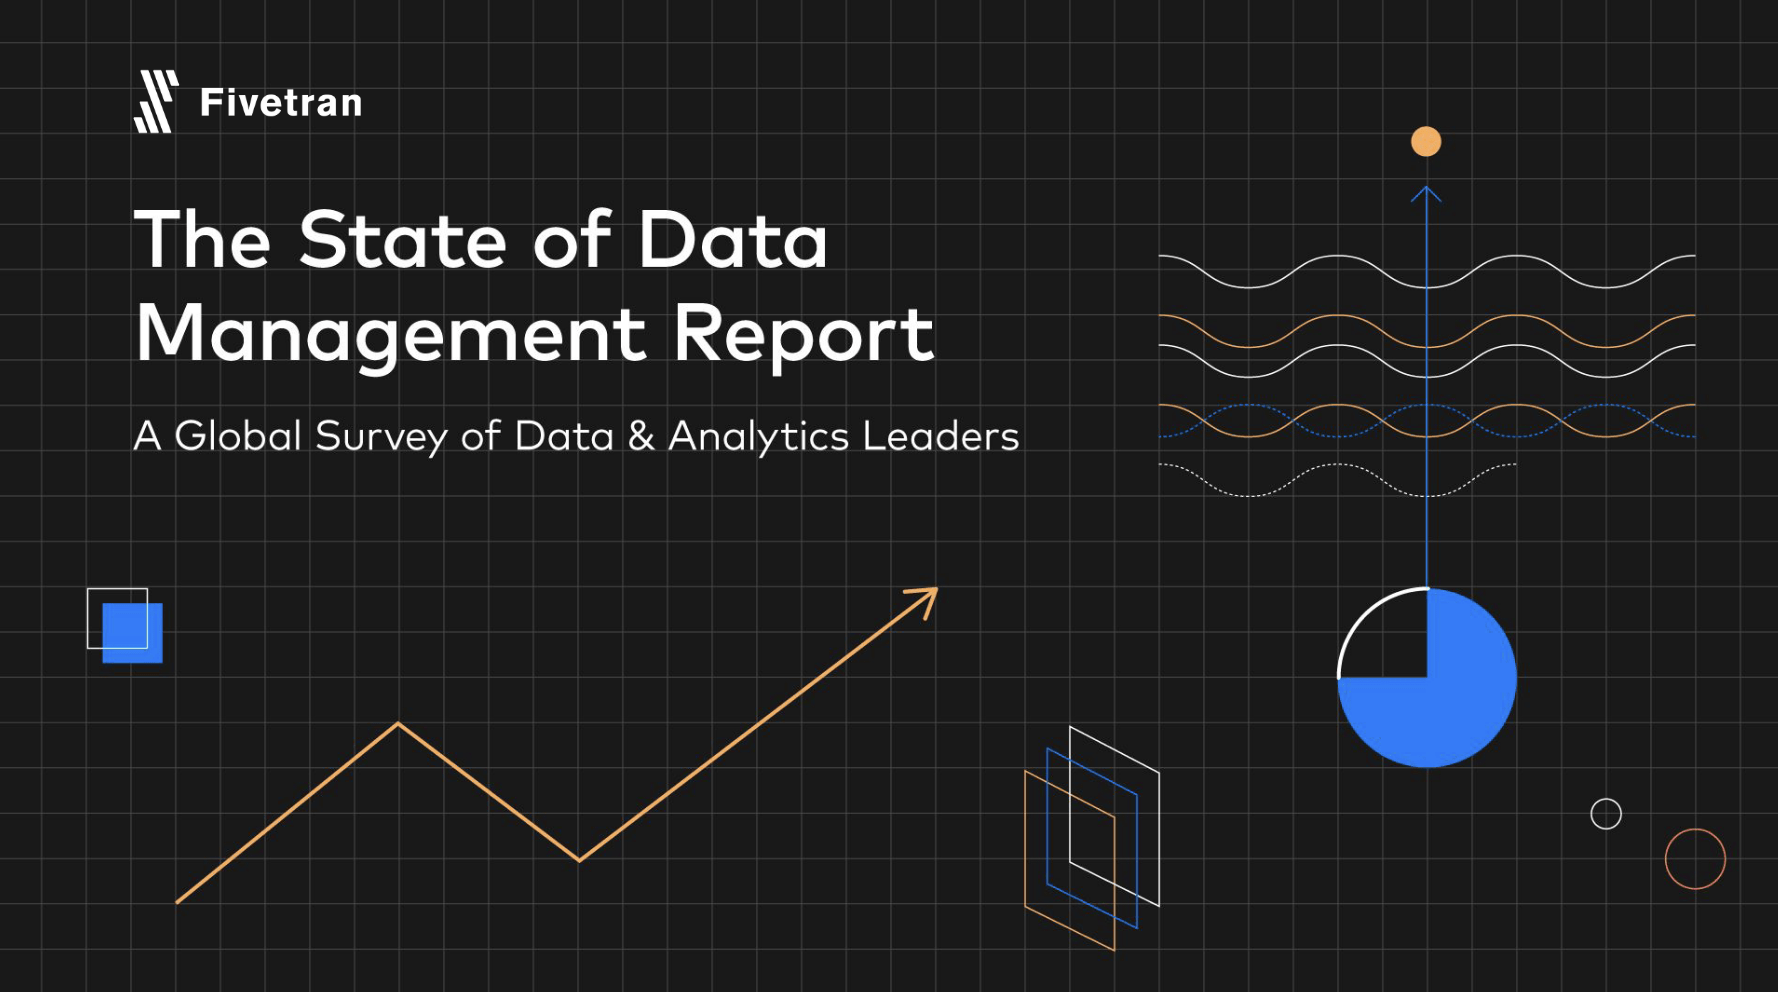 the state of data - The State of Data Management Report